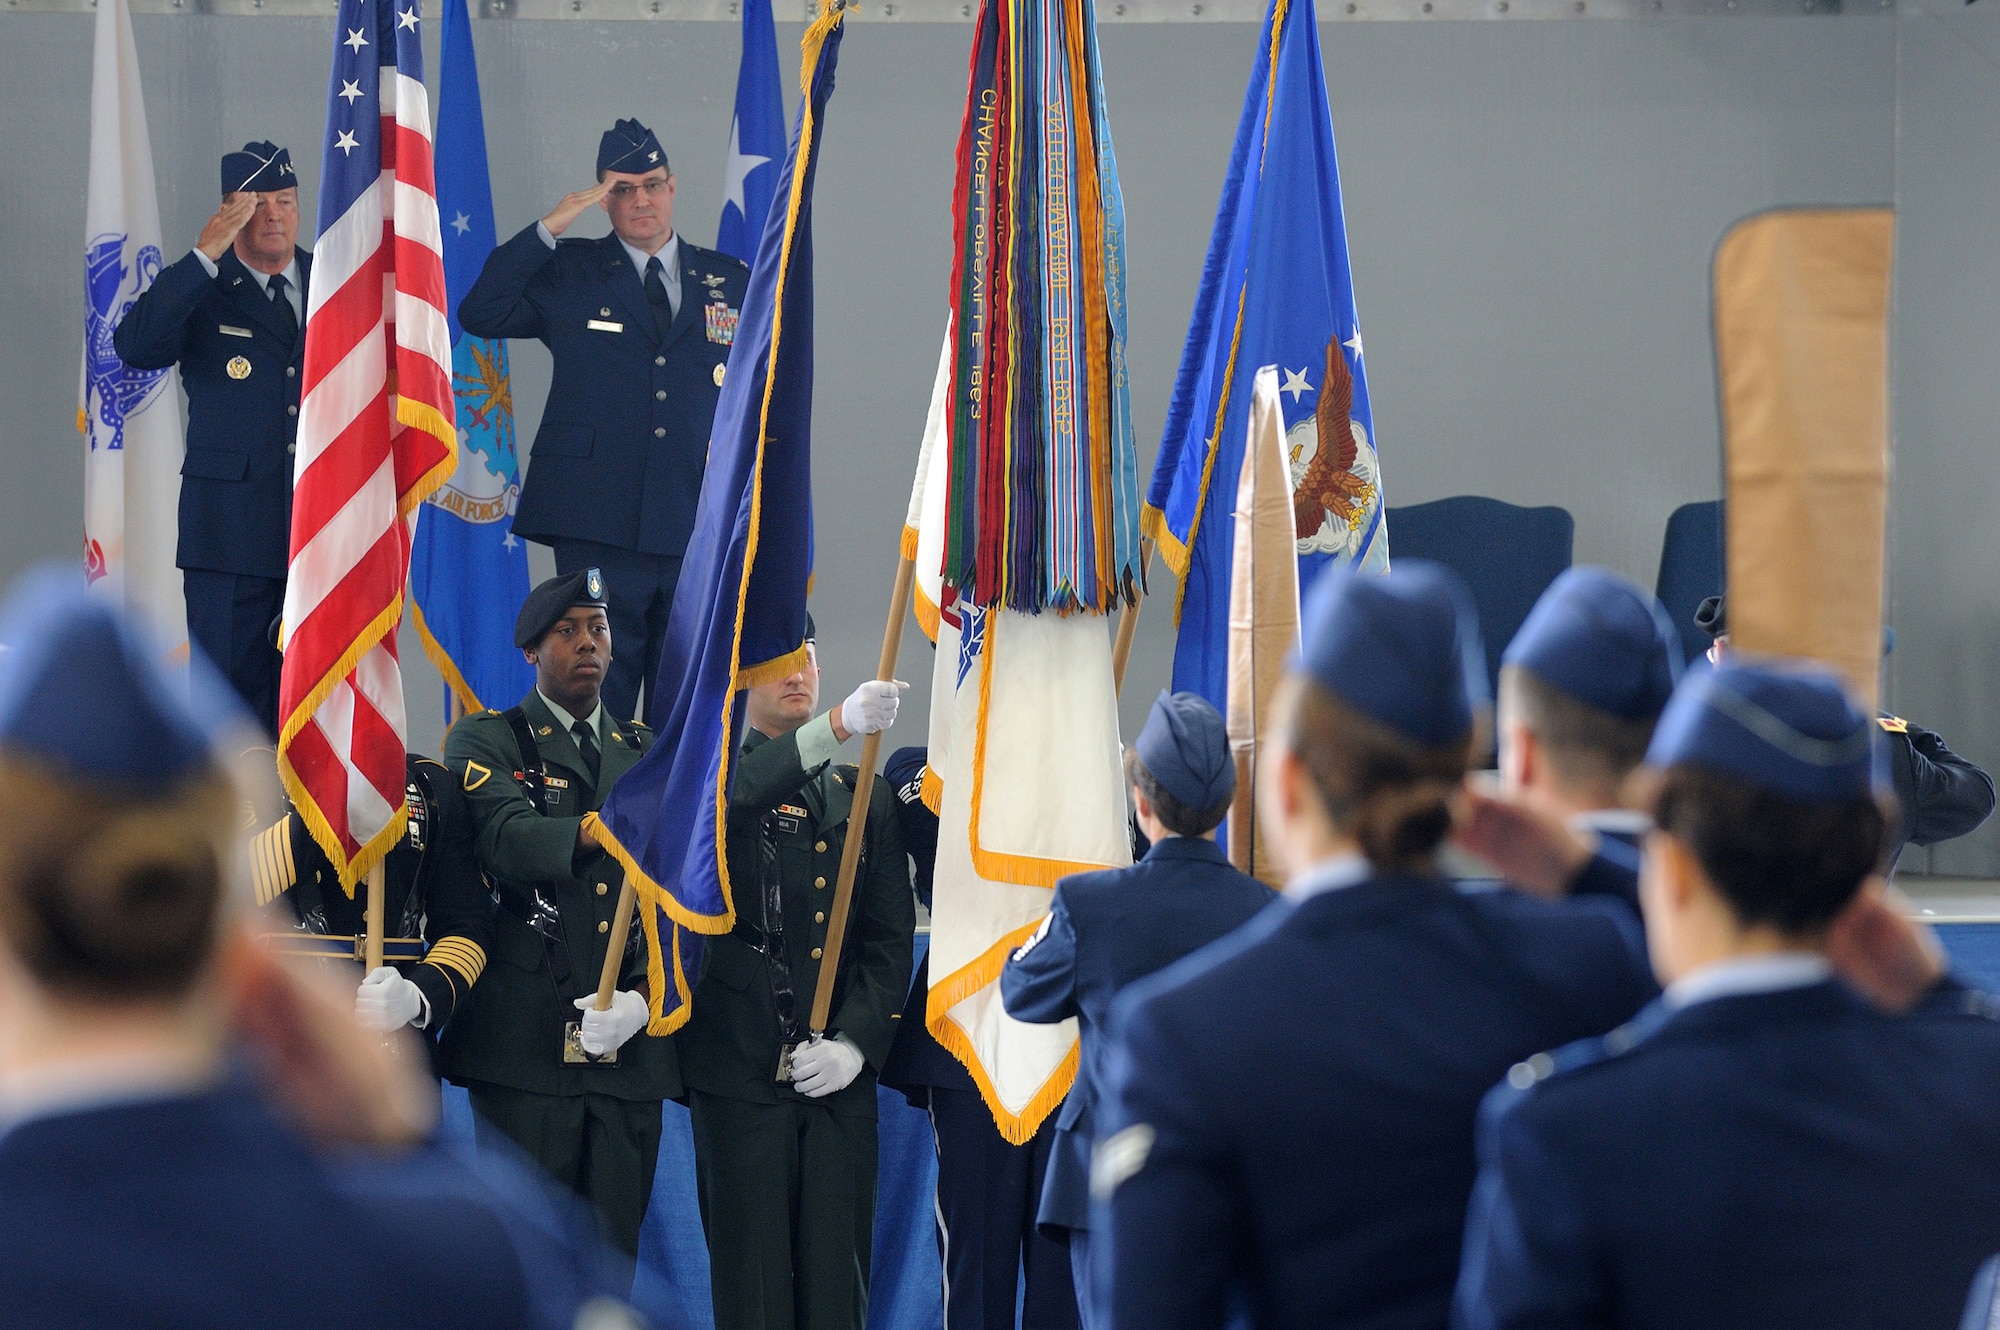 U. S. Air Force Lt .Gen. Dana Atkins, Alaskan Command commander and Air Force Col. Robert Evans, Joint Base Elmendorf-Richardson/673d Air Base Wing commander, pay respect to the colors presented by a joint color guard during the 673d ABW's July 30, 2010 activation ceremony, and Joint Base Elemendorf-Richardson, Alaska. (U.S. Air Force photo/Master Sgt. Jeremiah Erickson)